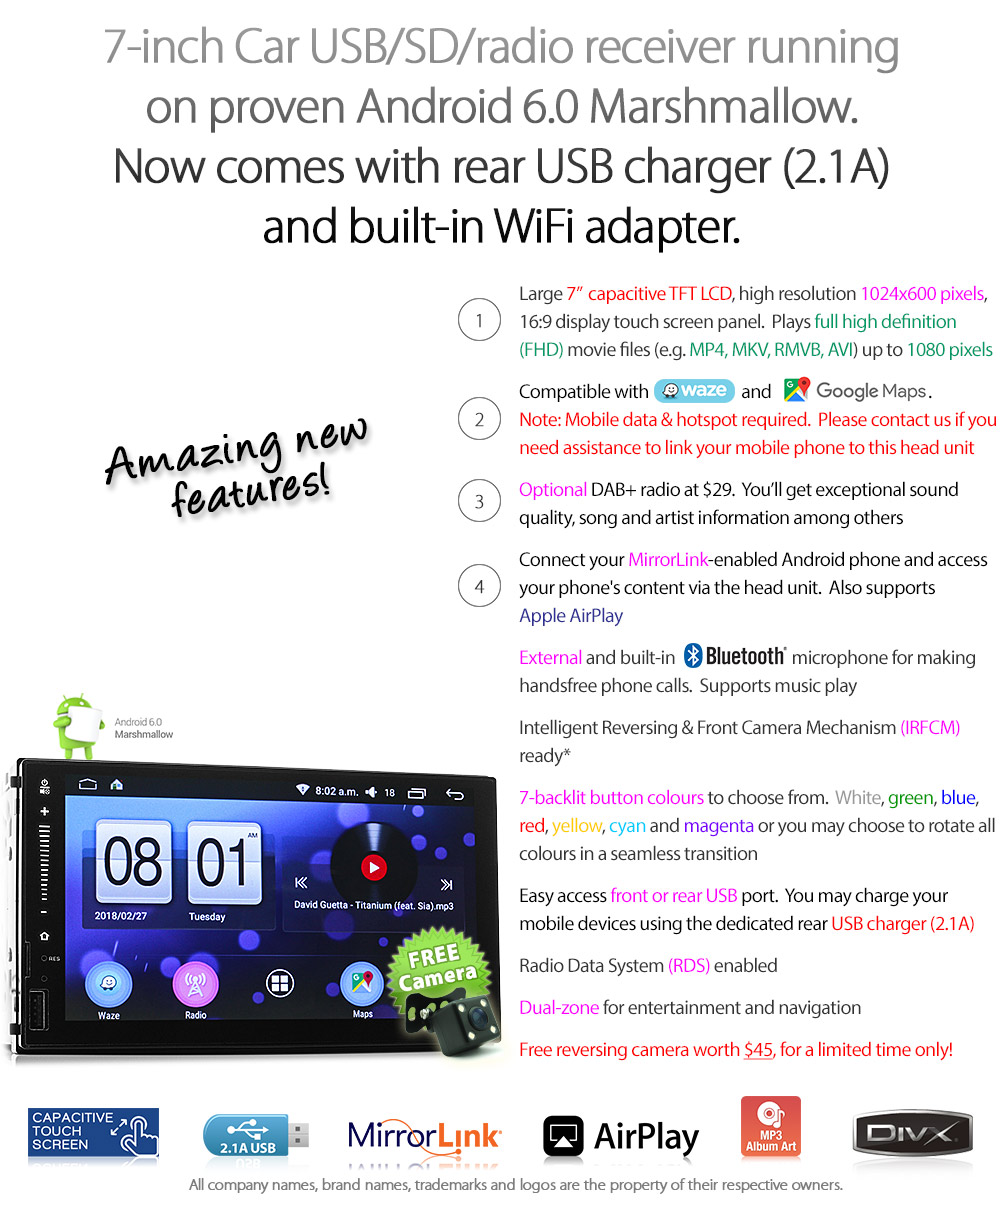 NS25AND GPS Aftermarket 7-inch Universal Double DIN Latest Australia UK European USA Original Android 6.0 6 Marshmallow car USB Charger 2.1A SD player radio stereo head unit details External and Internal Microphone Bluetooth Europe Sat Nav Navi Plug and Play ISO Plug Wiring Harness Matching Fascia Kit Facia Free Reversing Camera Album Art ID3 Tag RMVB MP3 MP4 AVI MKV Full High Definition FHD Apple AirPlay Air Play MirrorLink Mirror Link 1080p DAB+ Digital Radio DAB + Compatible With Connects2